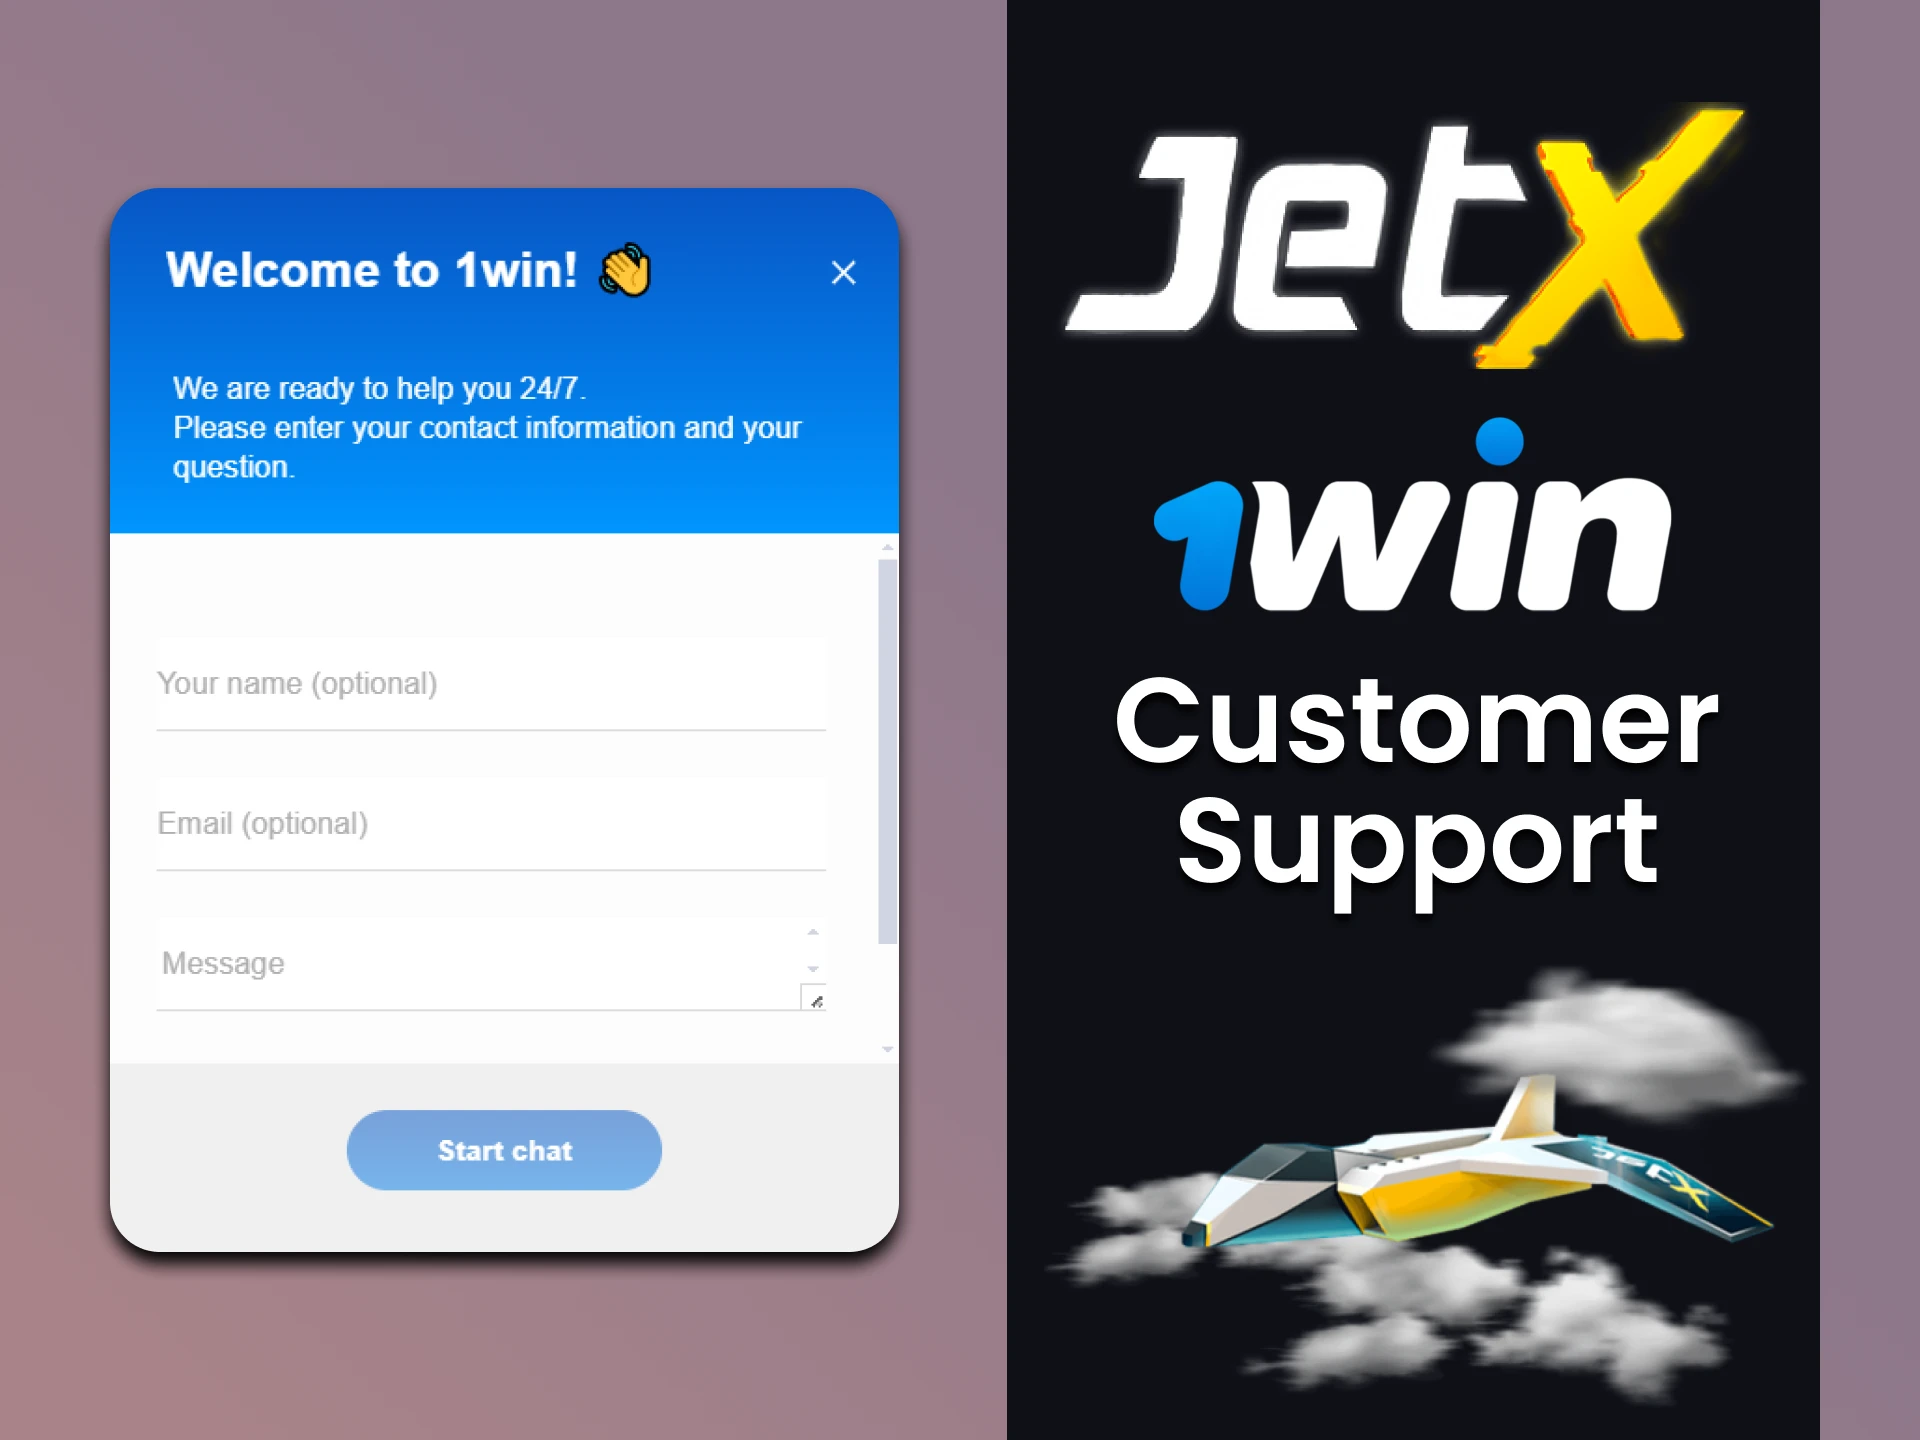 There is support for the JetX game on 1win.